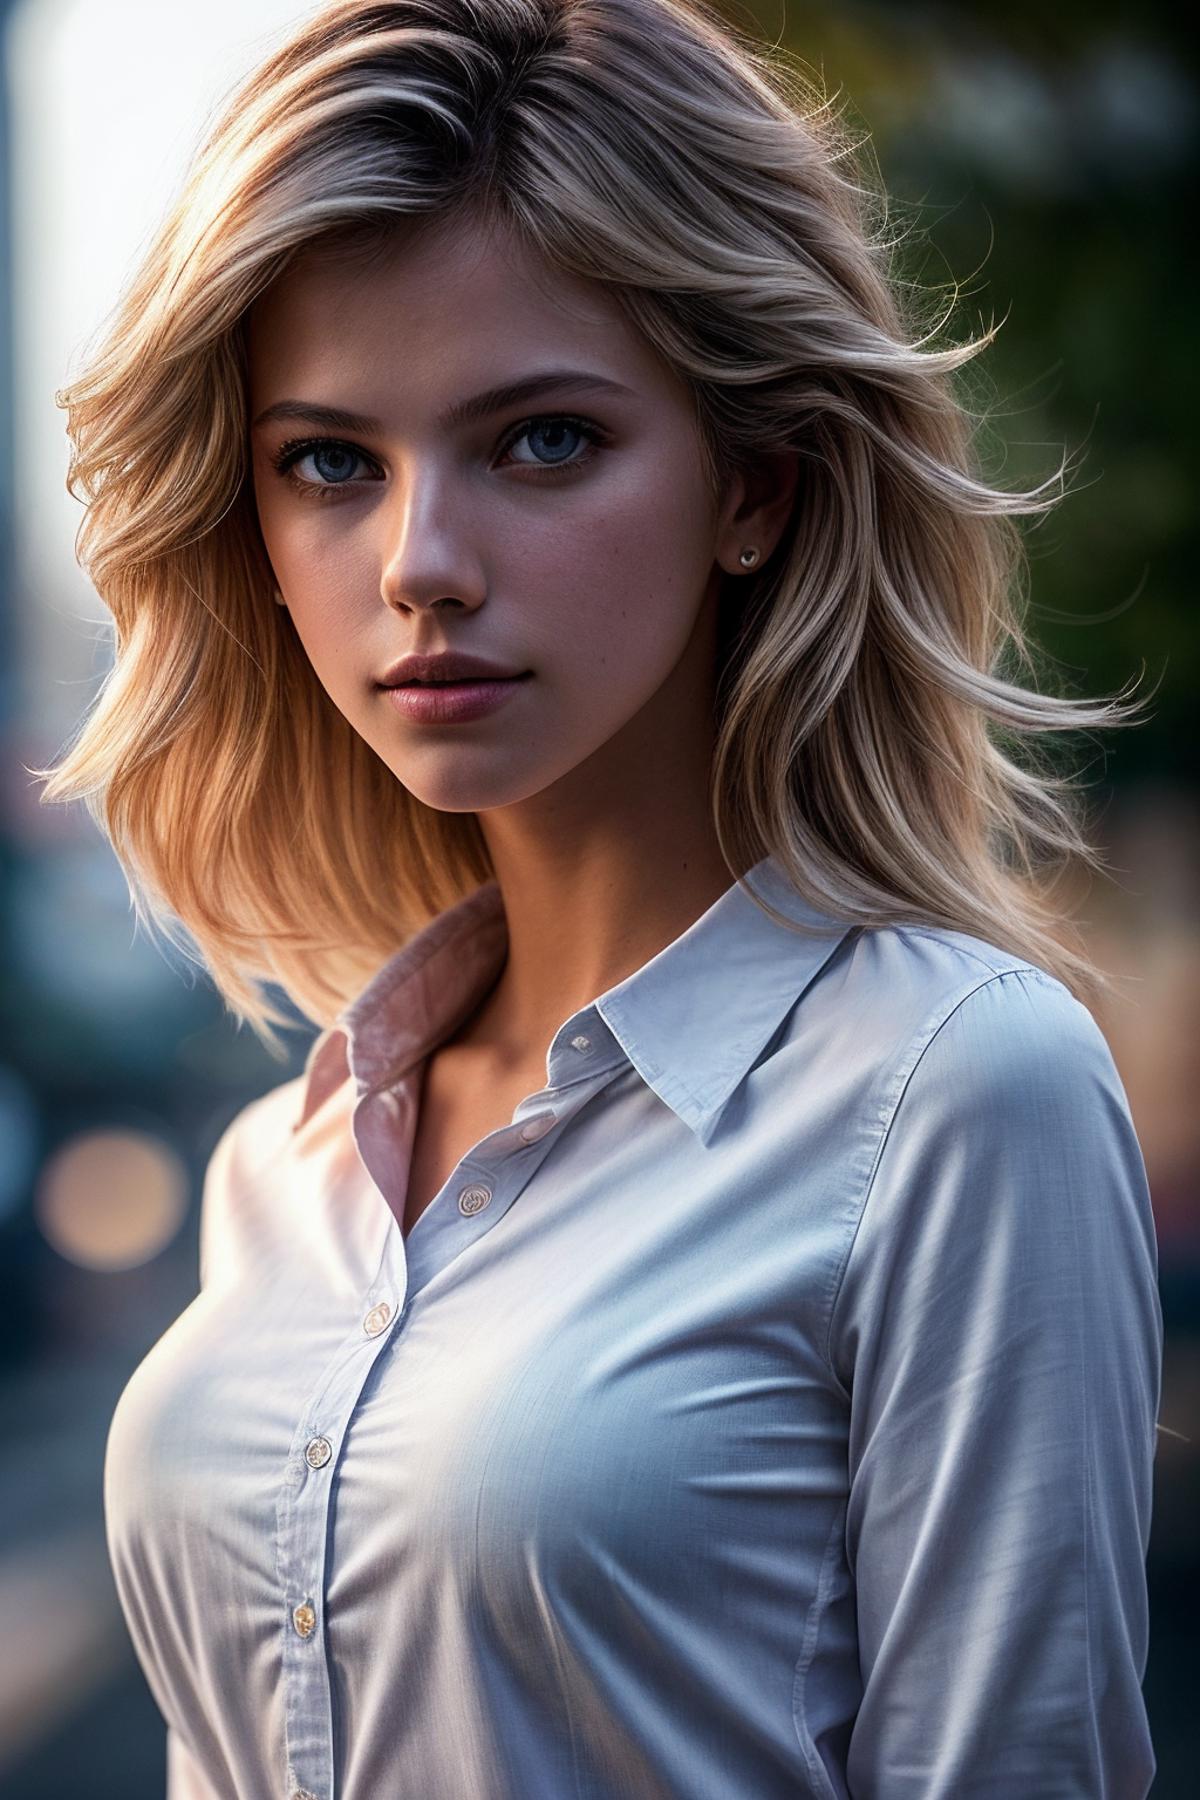 Blonde-haired Woman in a White Shirt with a Collar and Button-up.